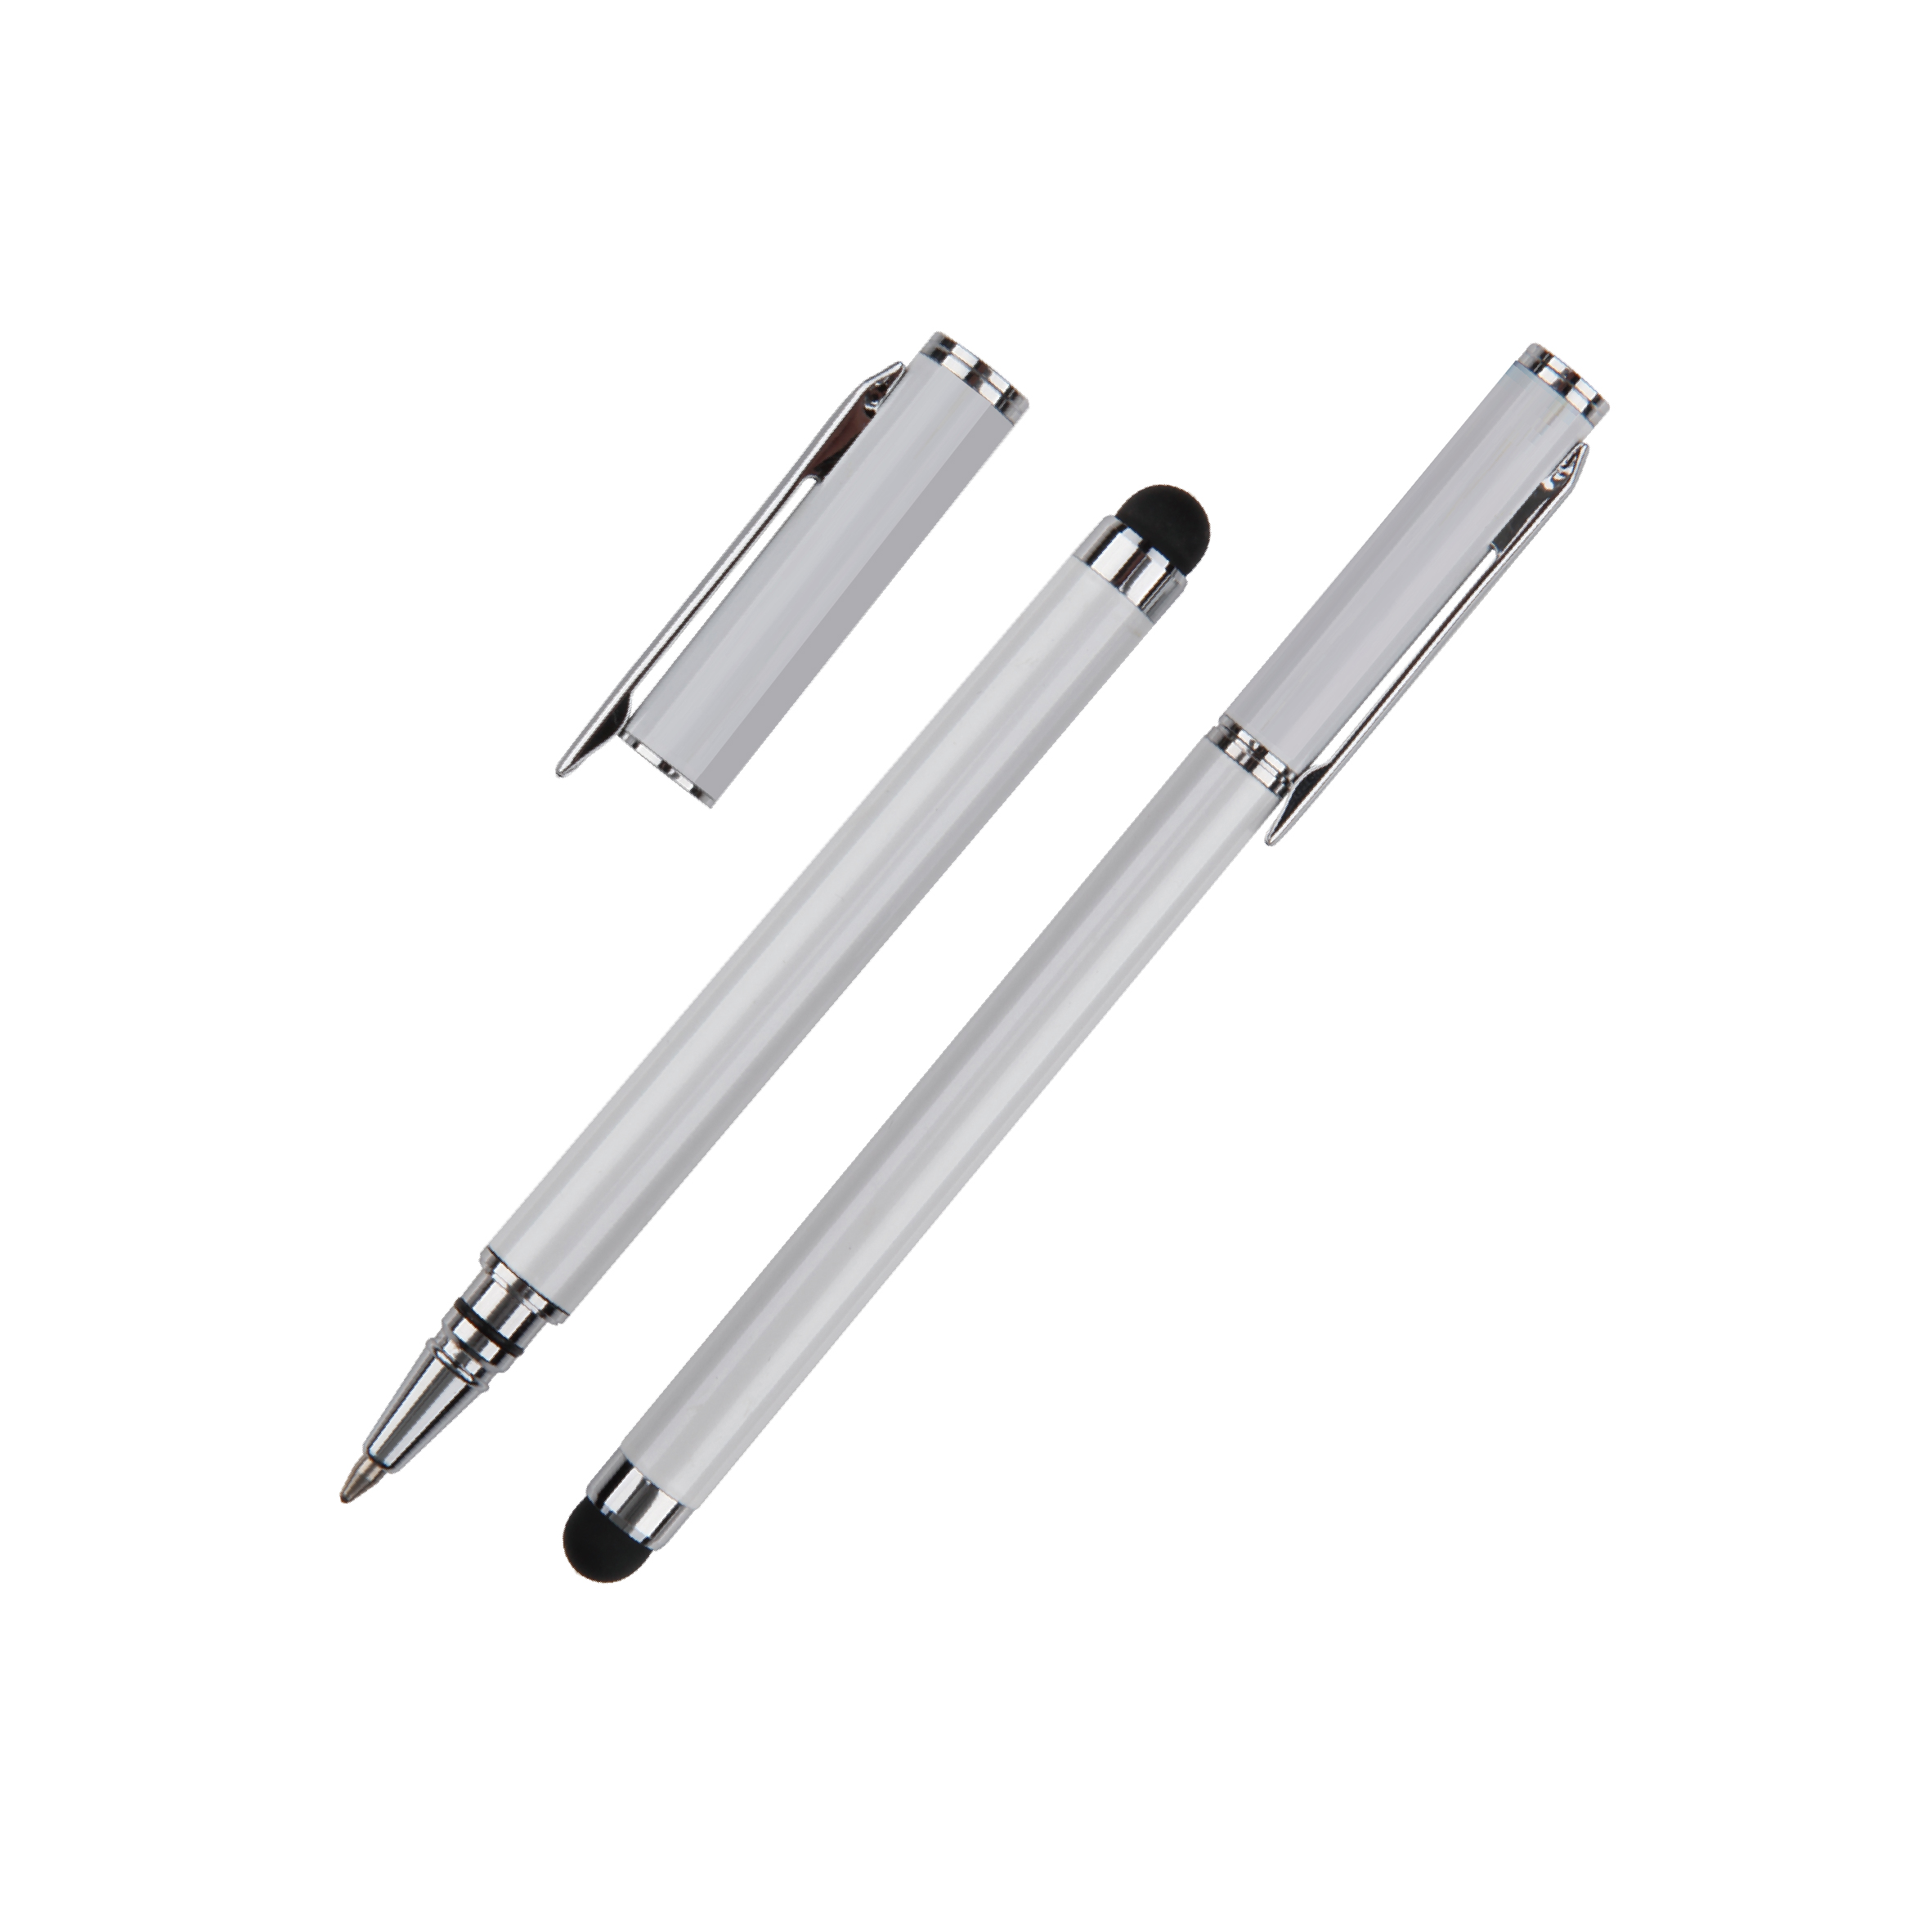 0.7/1.0mm Cap-Off Metal Ball Pen With Stylus on End